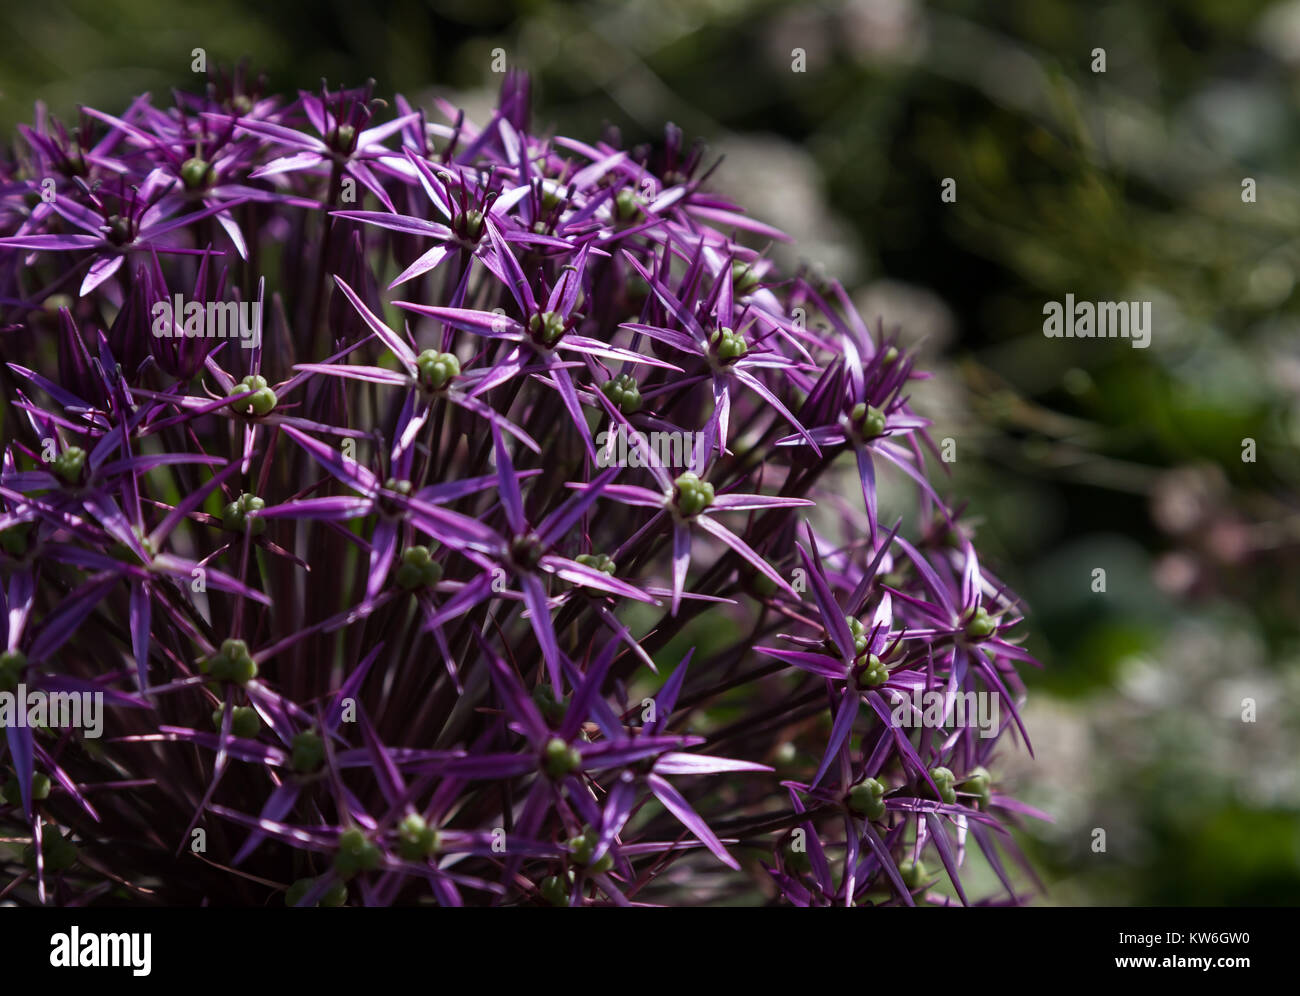 Close up of a large purple Allium flower head with star shaped flowers beginning to turn to seed Stock Photo